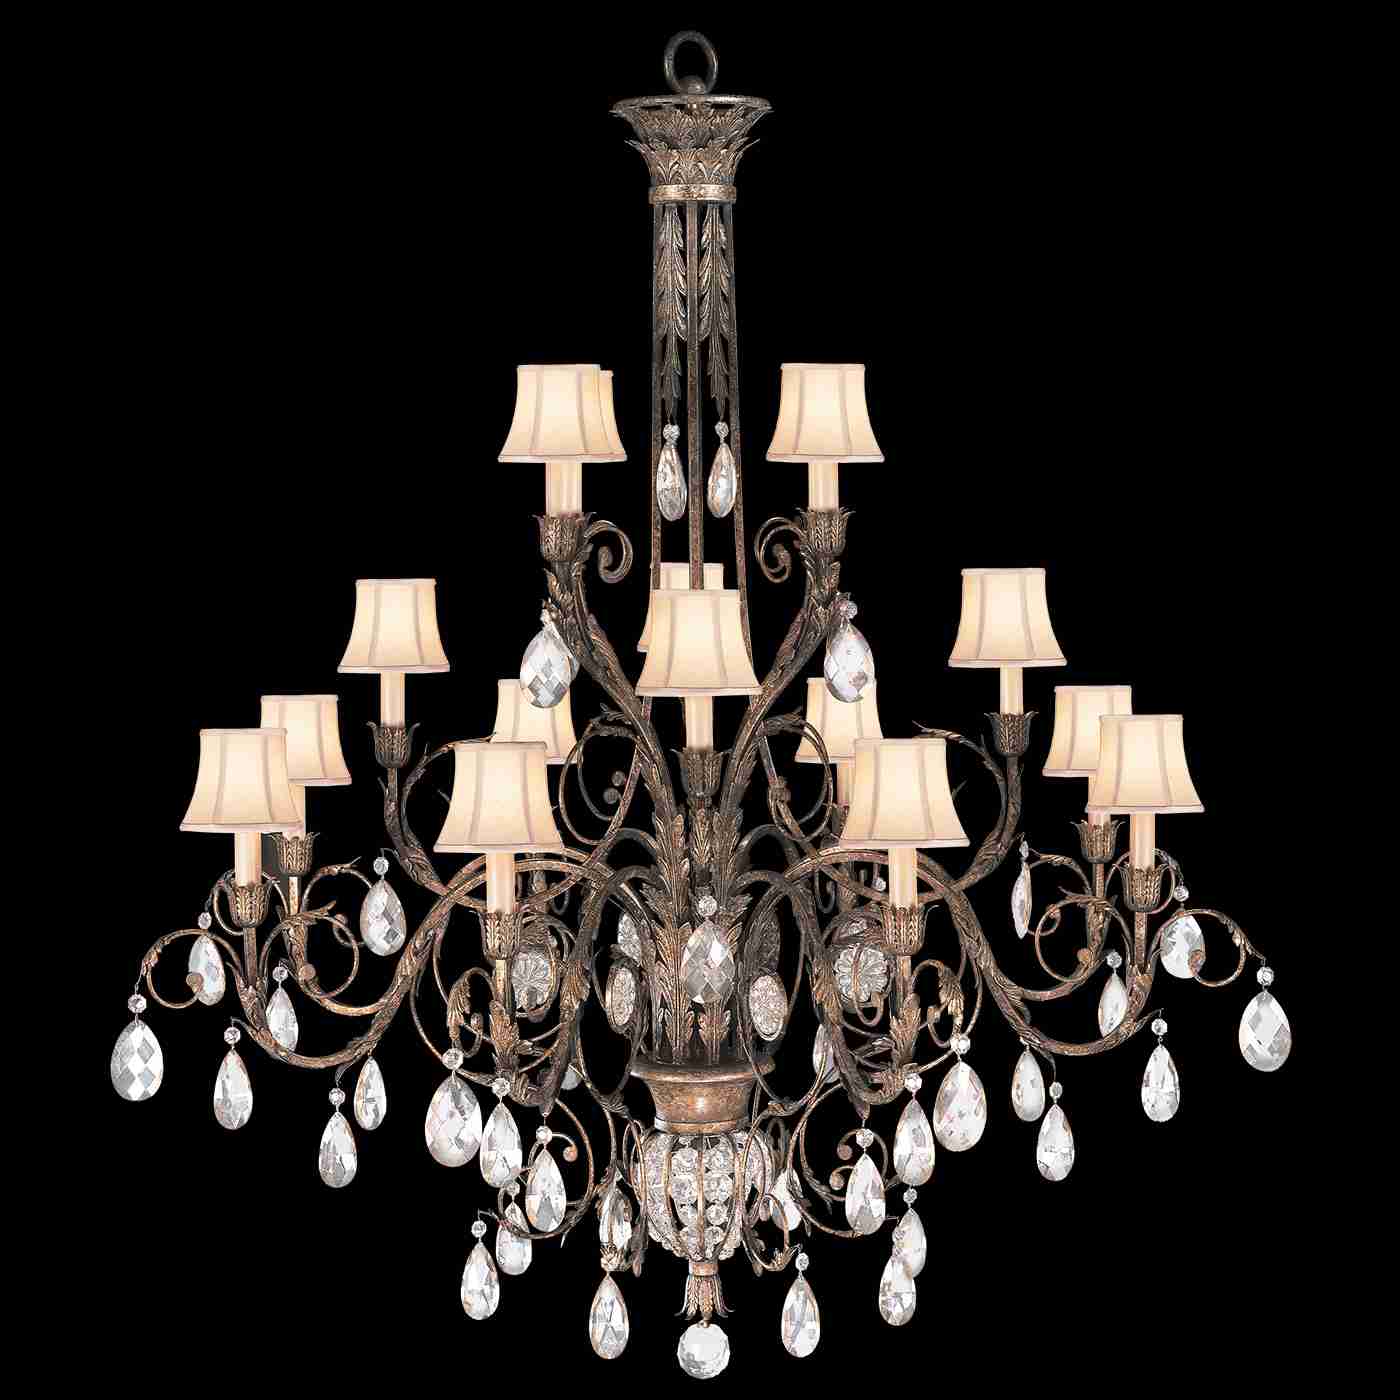 A Midsummer Nights Dream Chandelier Gold with Shades